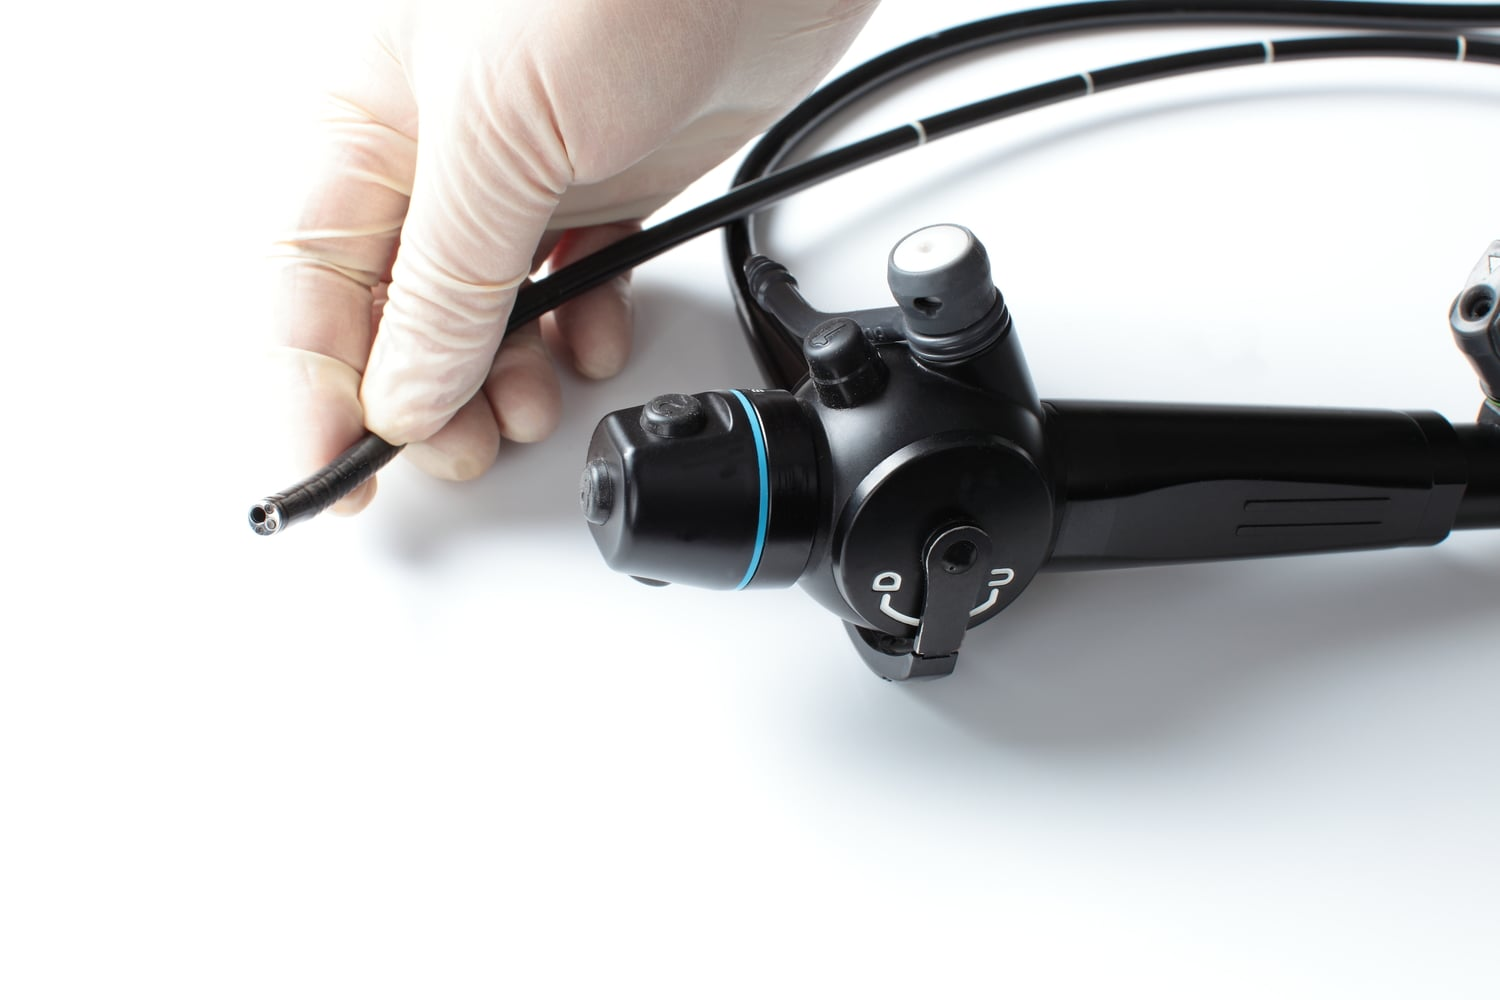 Endoscopy Devices Market Research Report 2016-2023 Added By DecisionDatabases